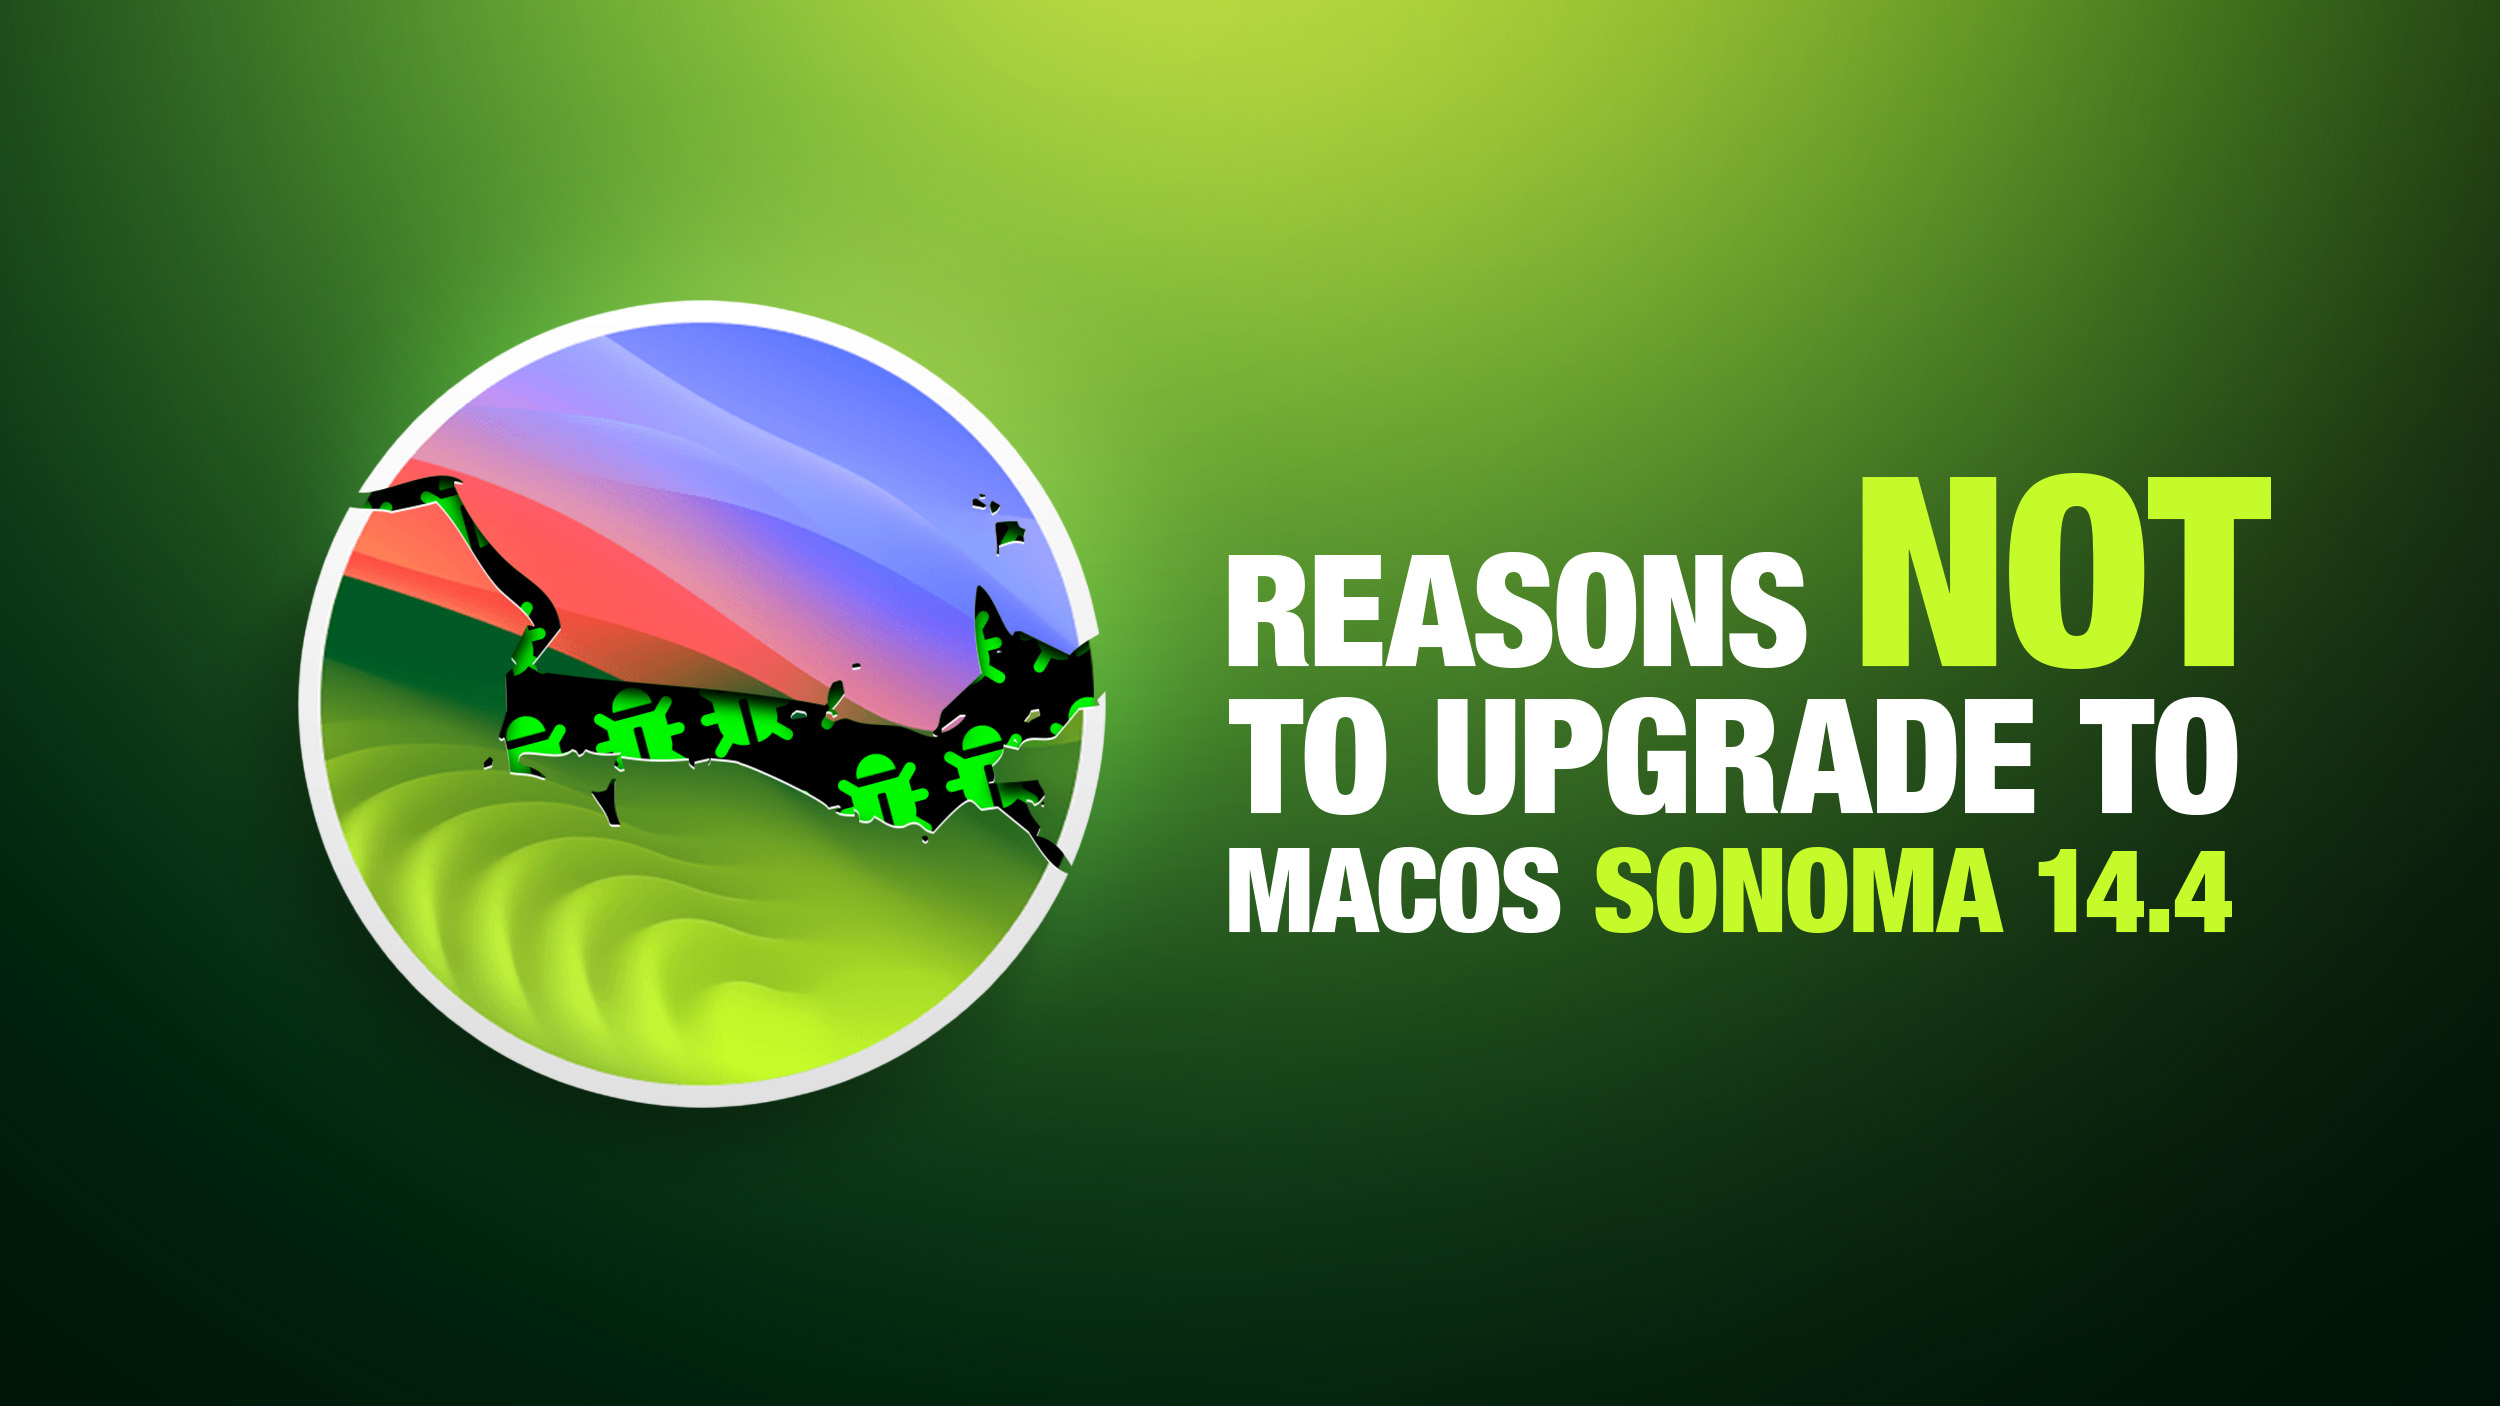 Reasons to Not Upgrade to macOS Sonoma 14